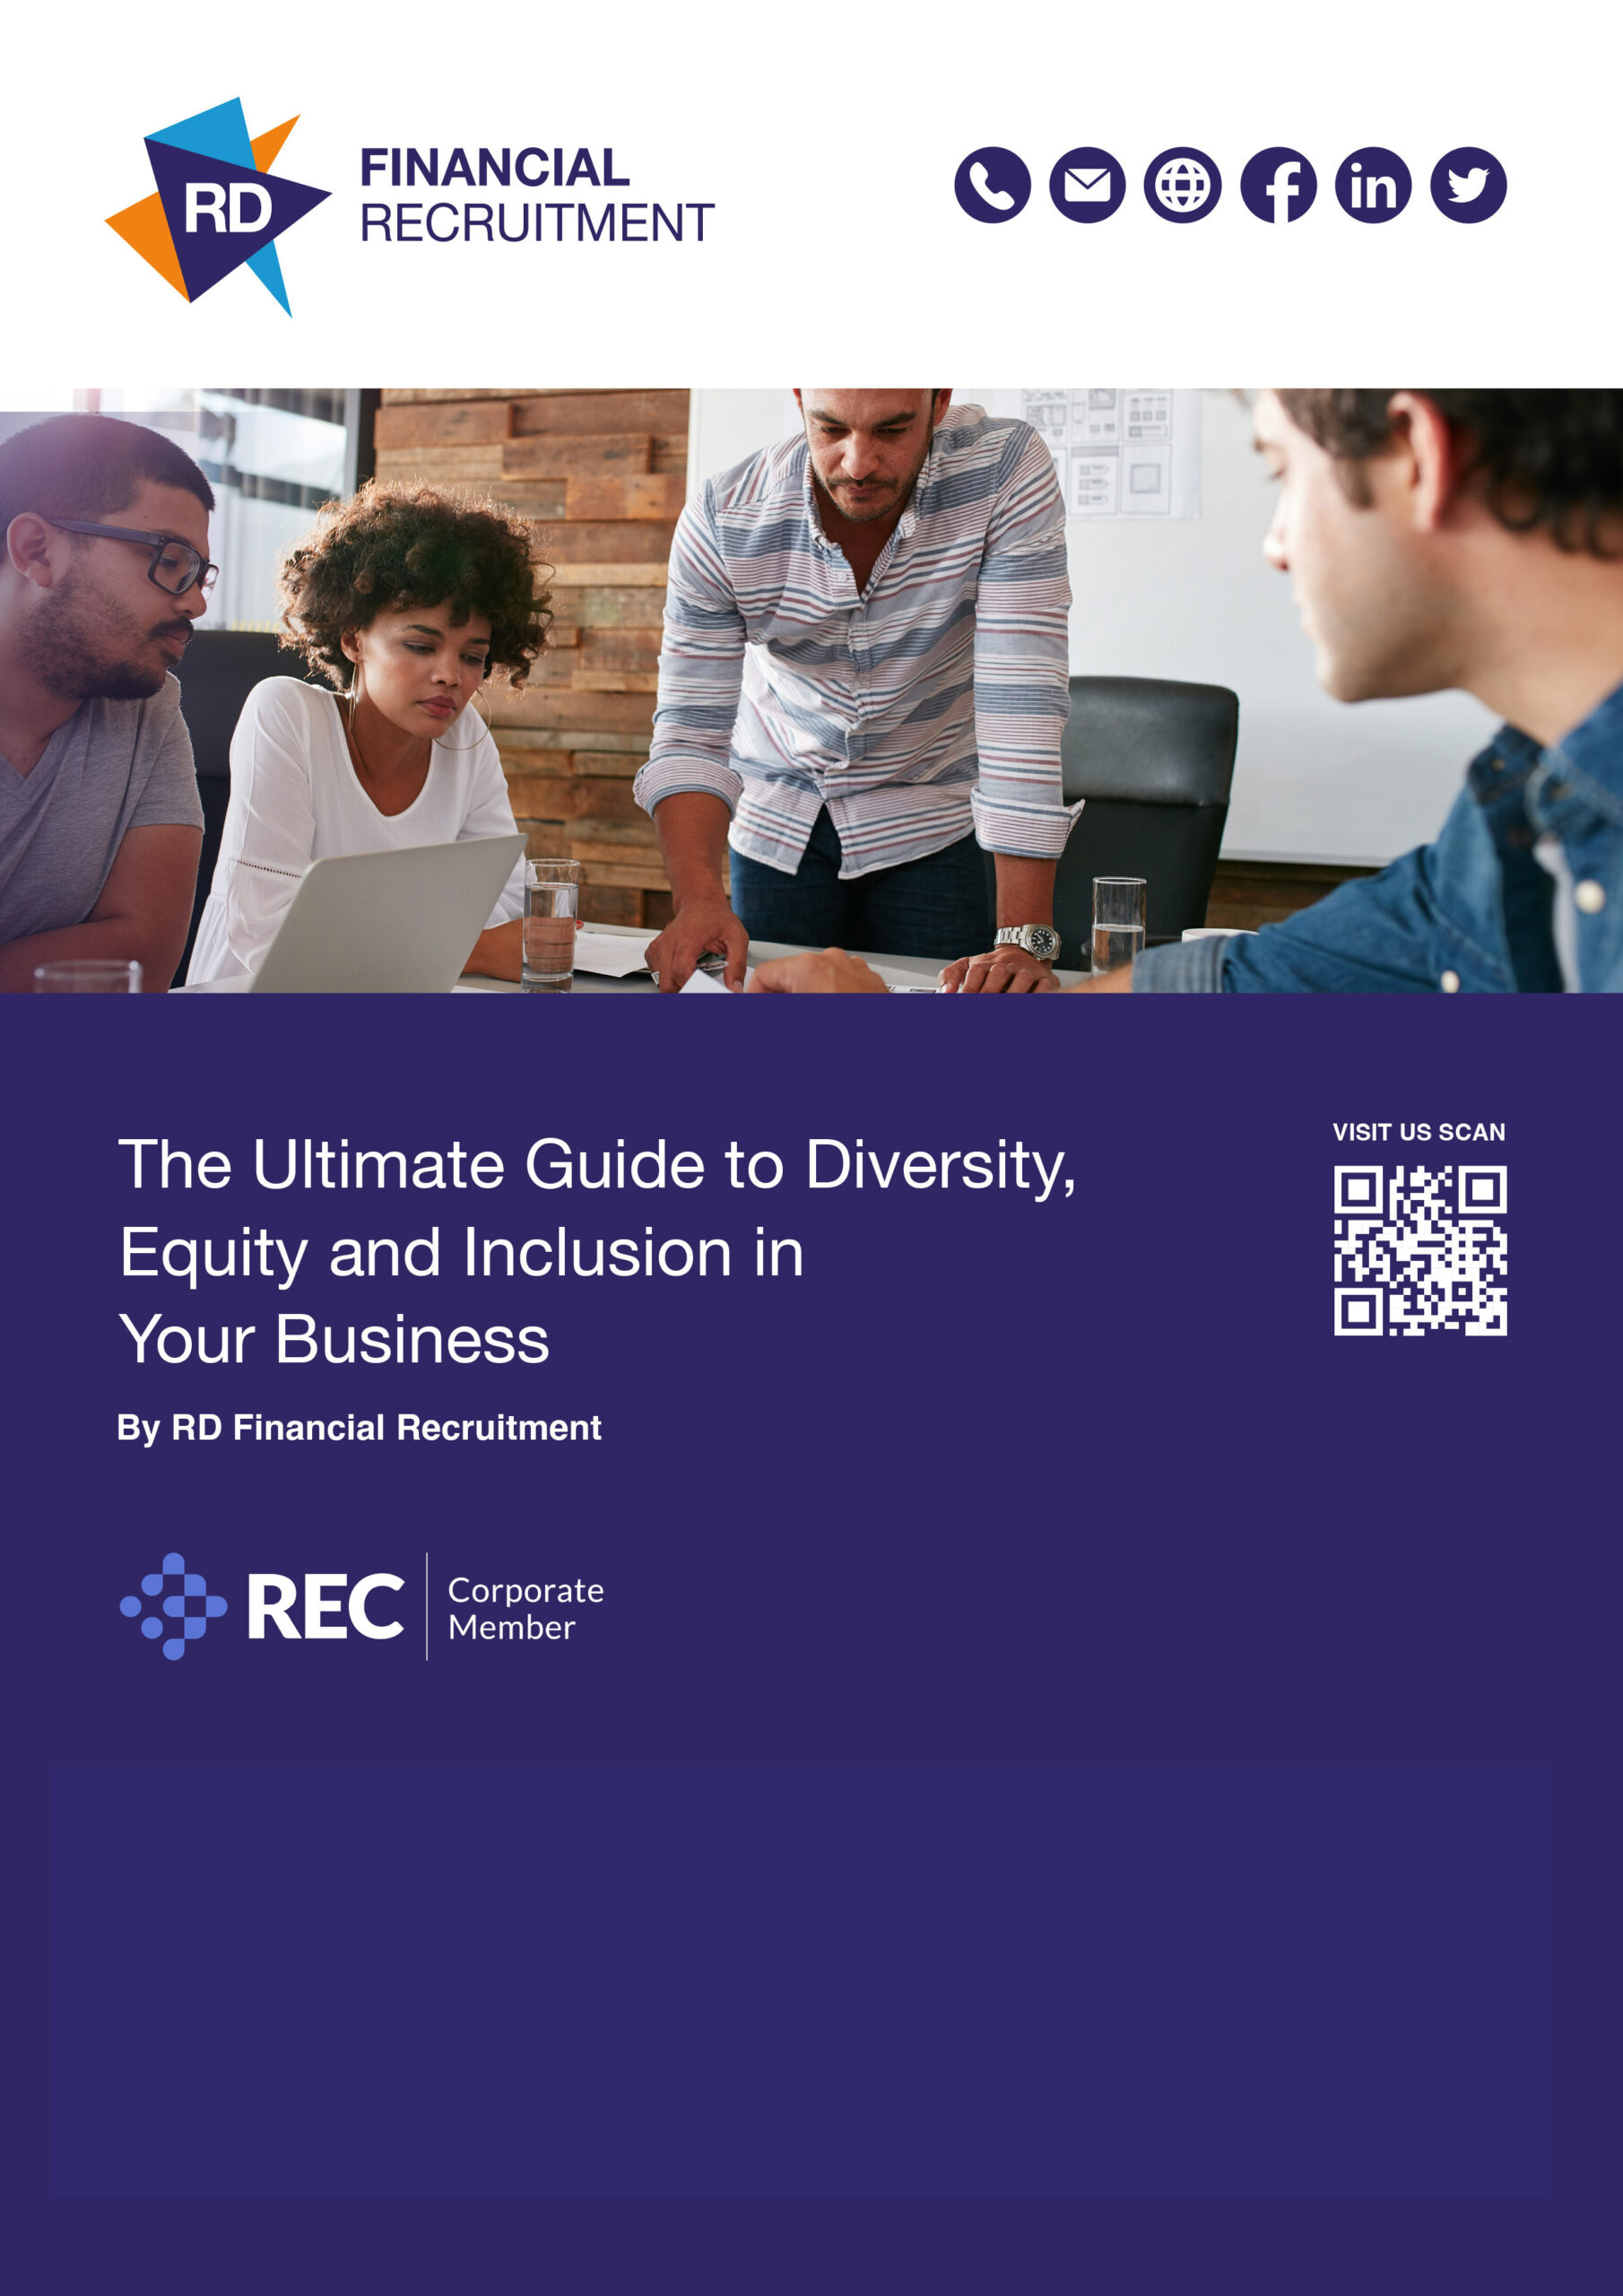 The-Ultimate-Guide-to-Diversity-Equity-and-Inclusion-in-Your-Business-212x300